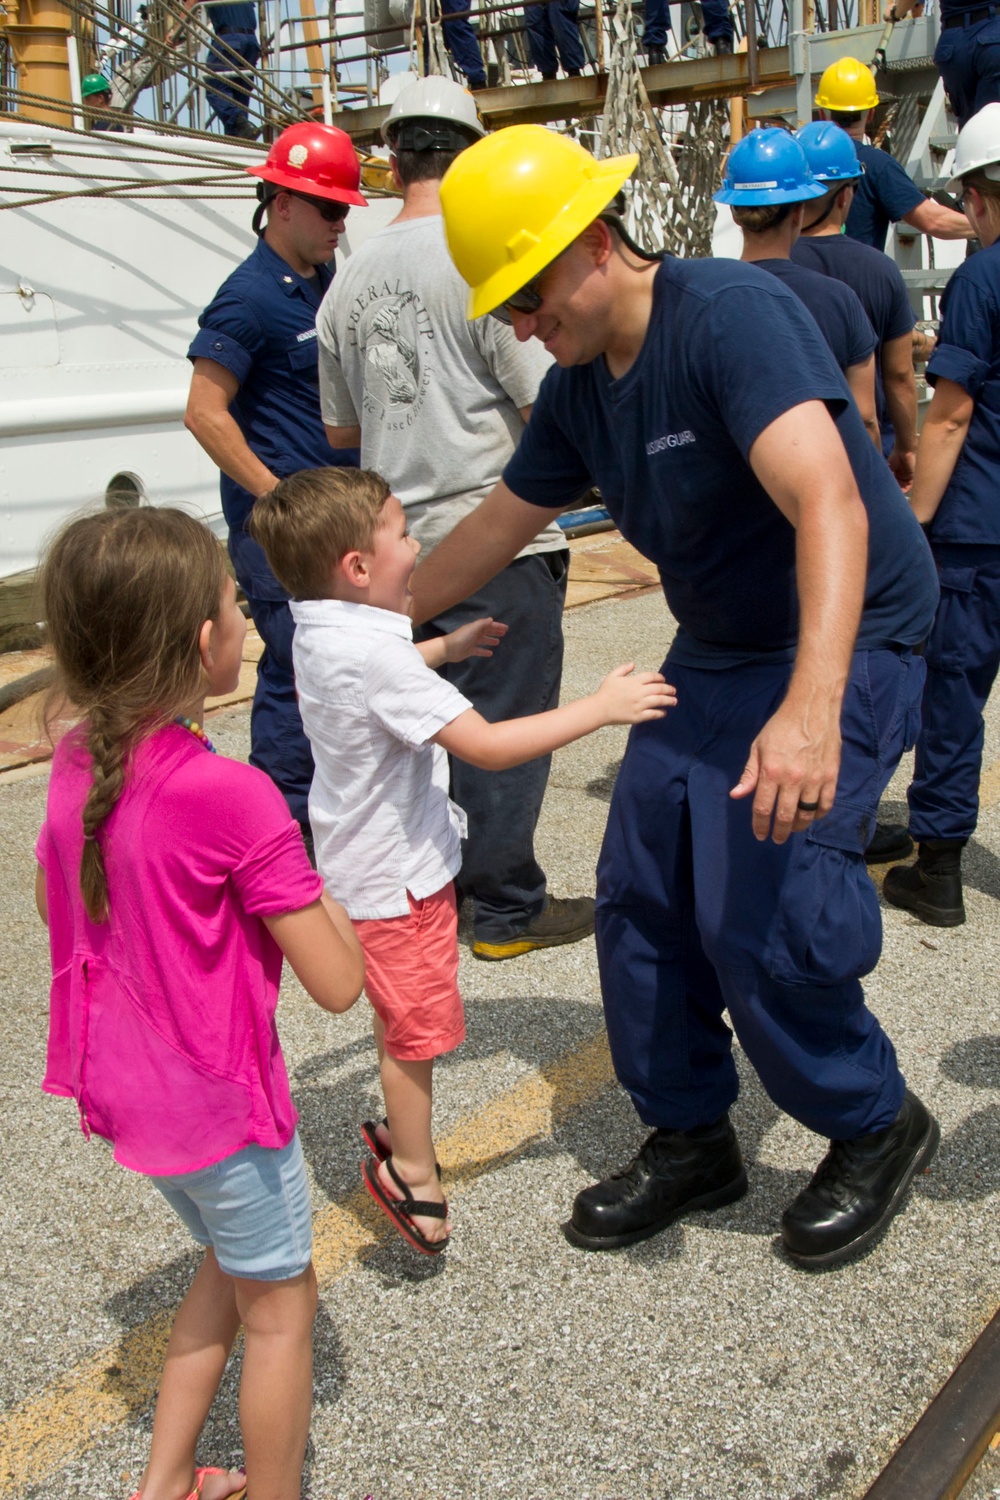 After Months Away, USCG Eagle Returns to Homeport